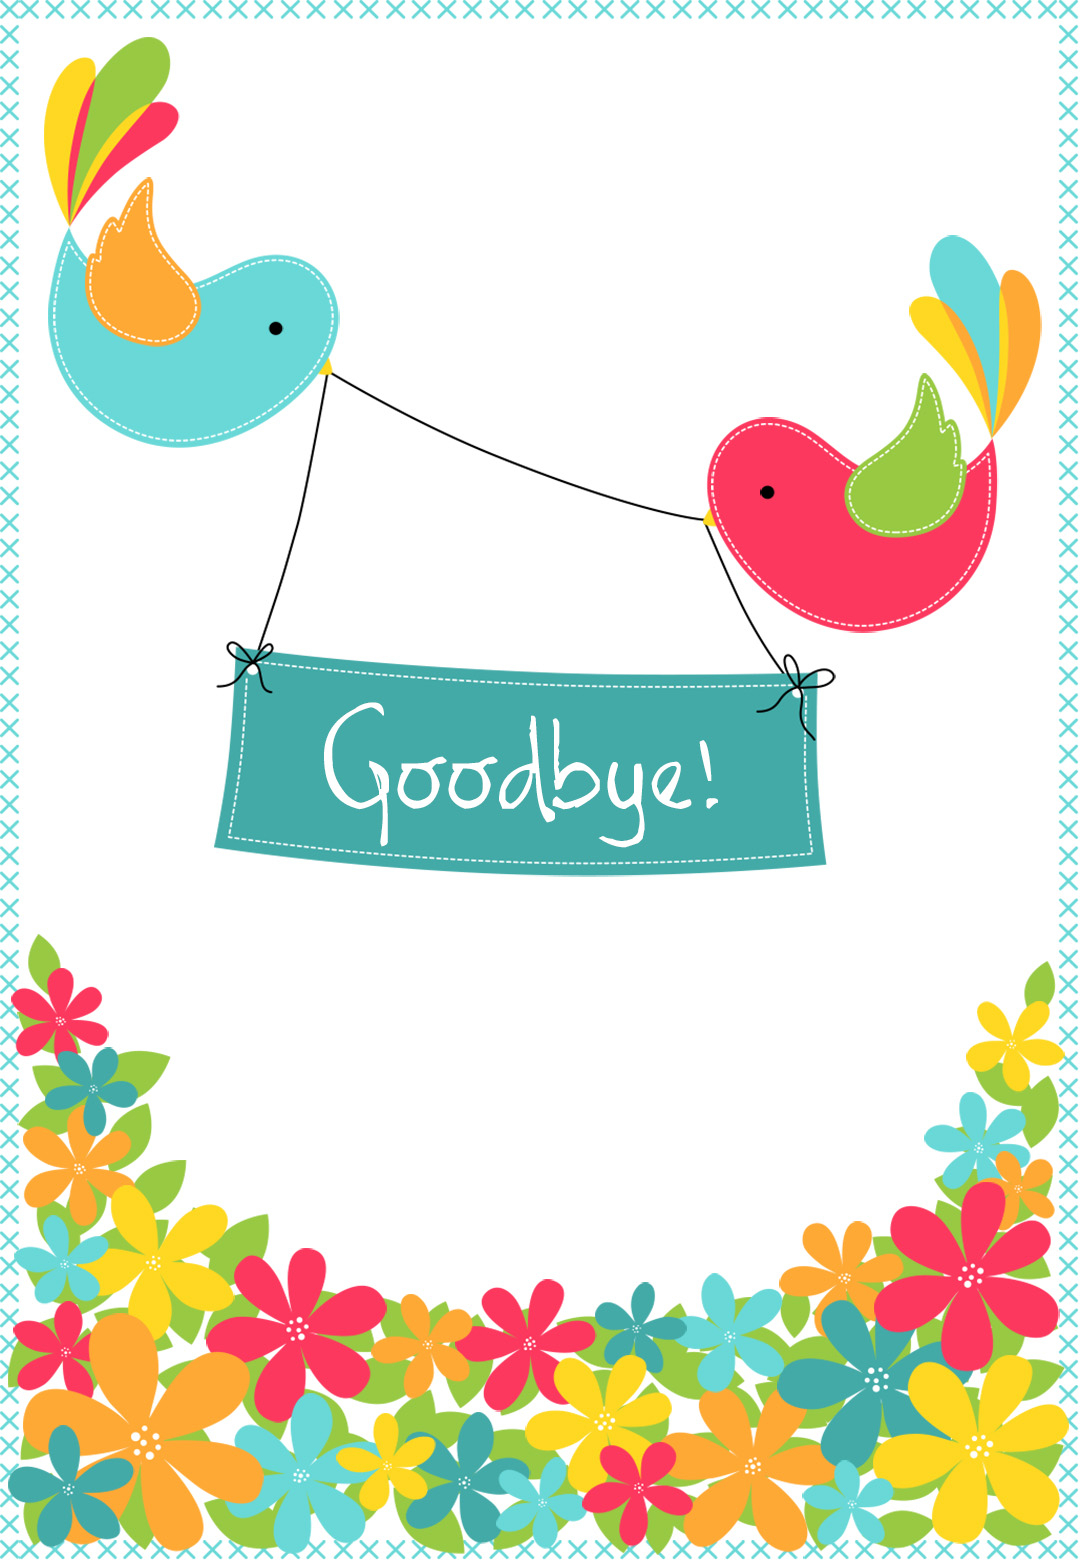 Goodbye From Your Colleagues - Good Luck Card (Free Intended For Goodbye Card Template